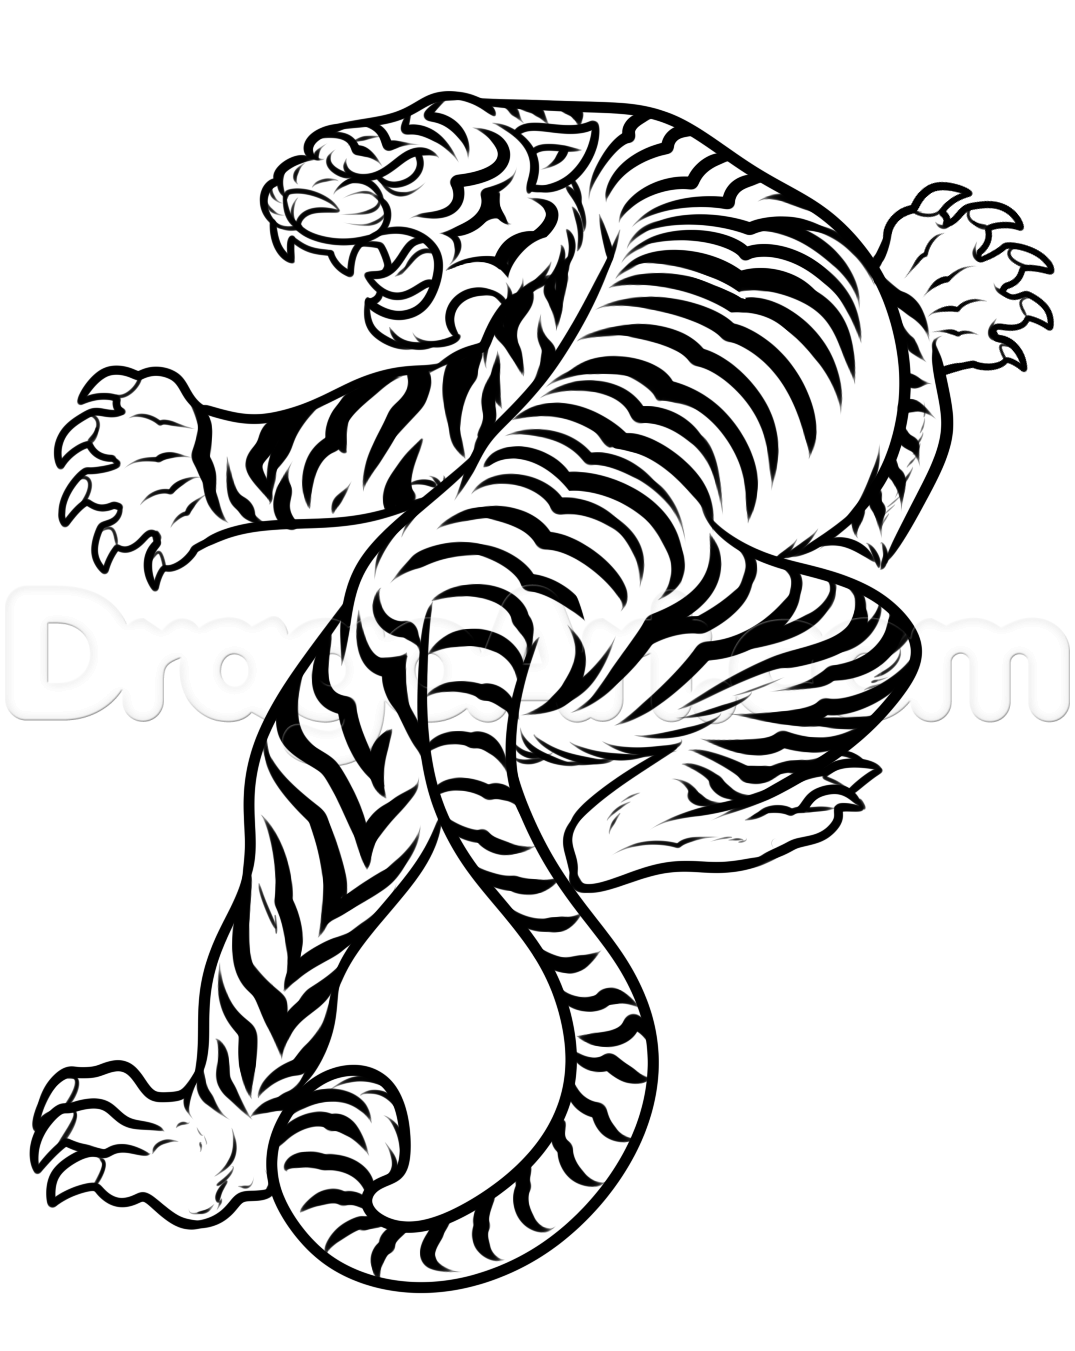 how-to-draw-a-japanese-tiger-tattoo-step-8_1_000000183840_5